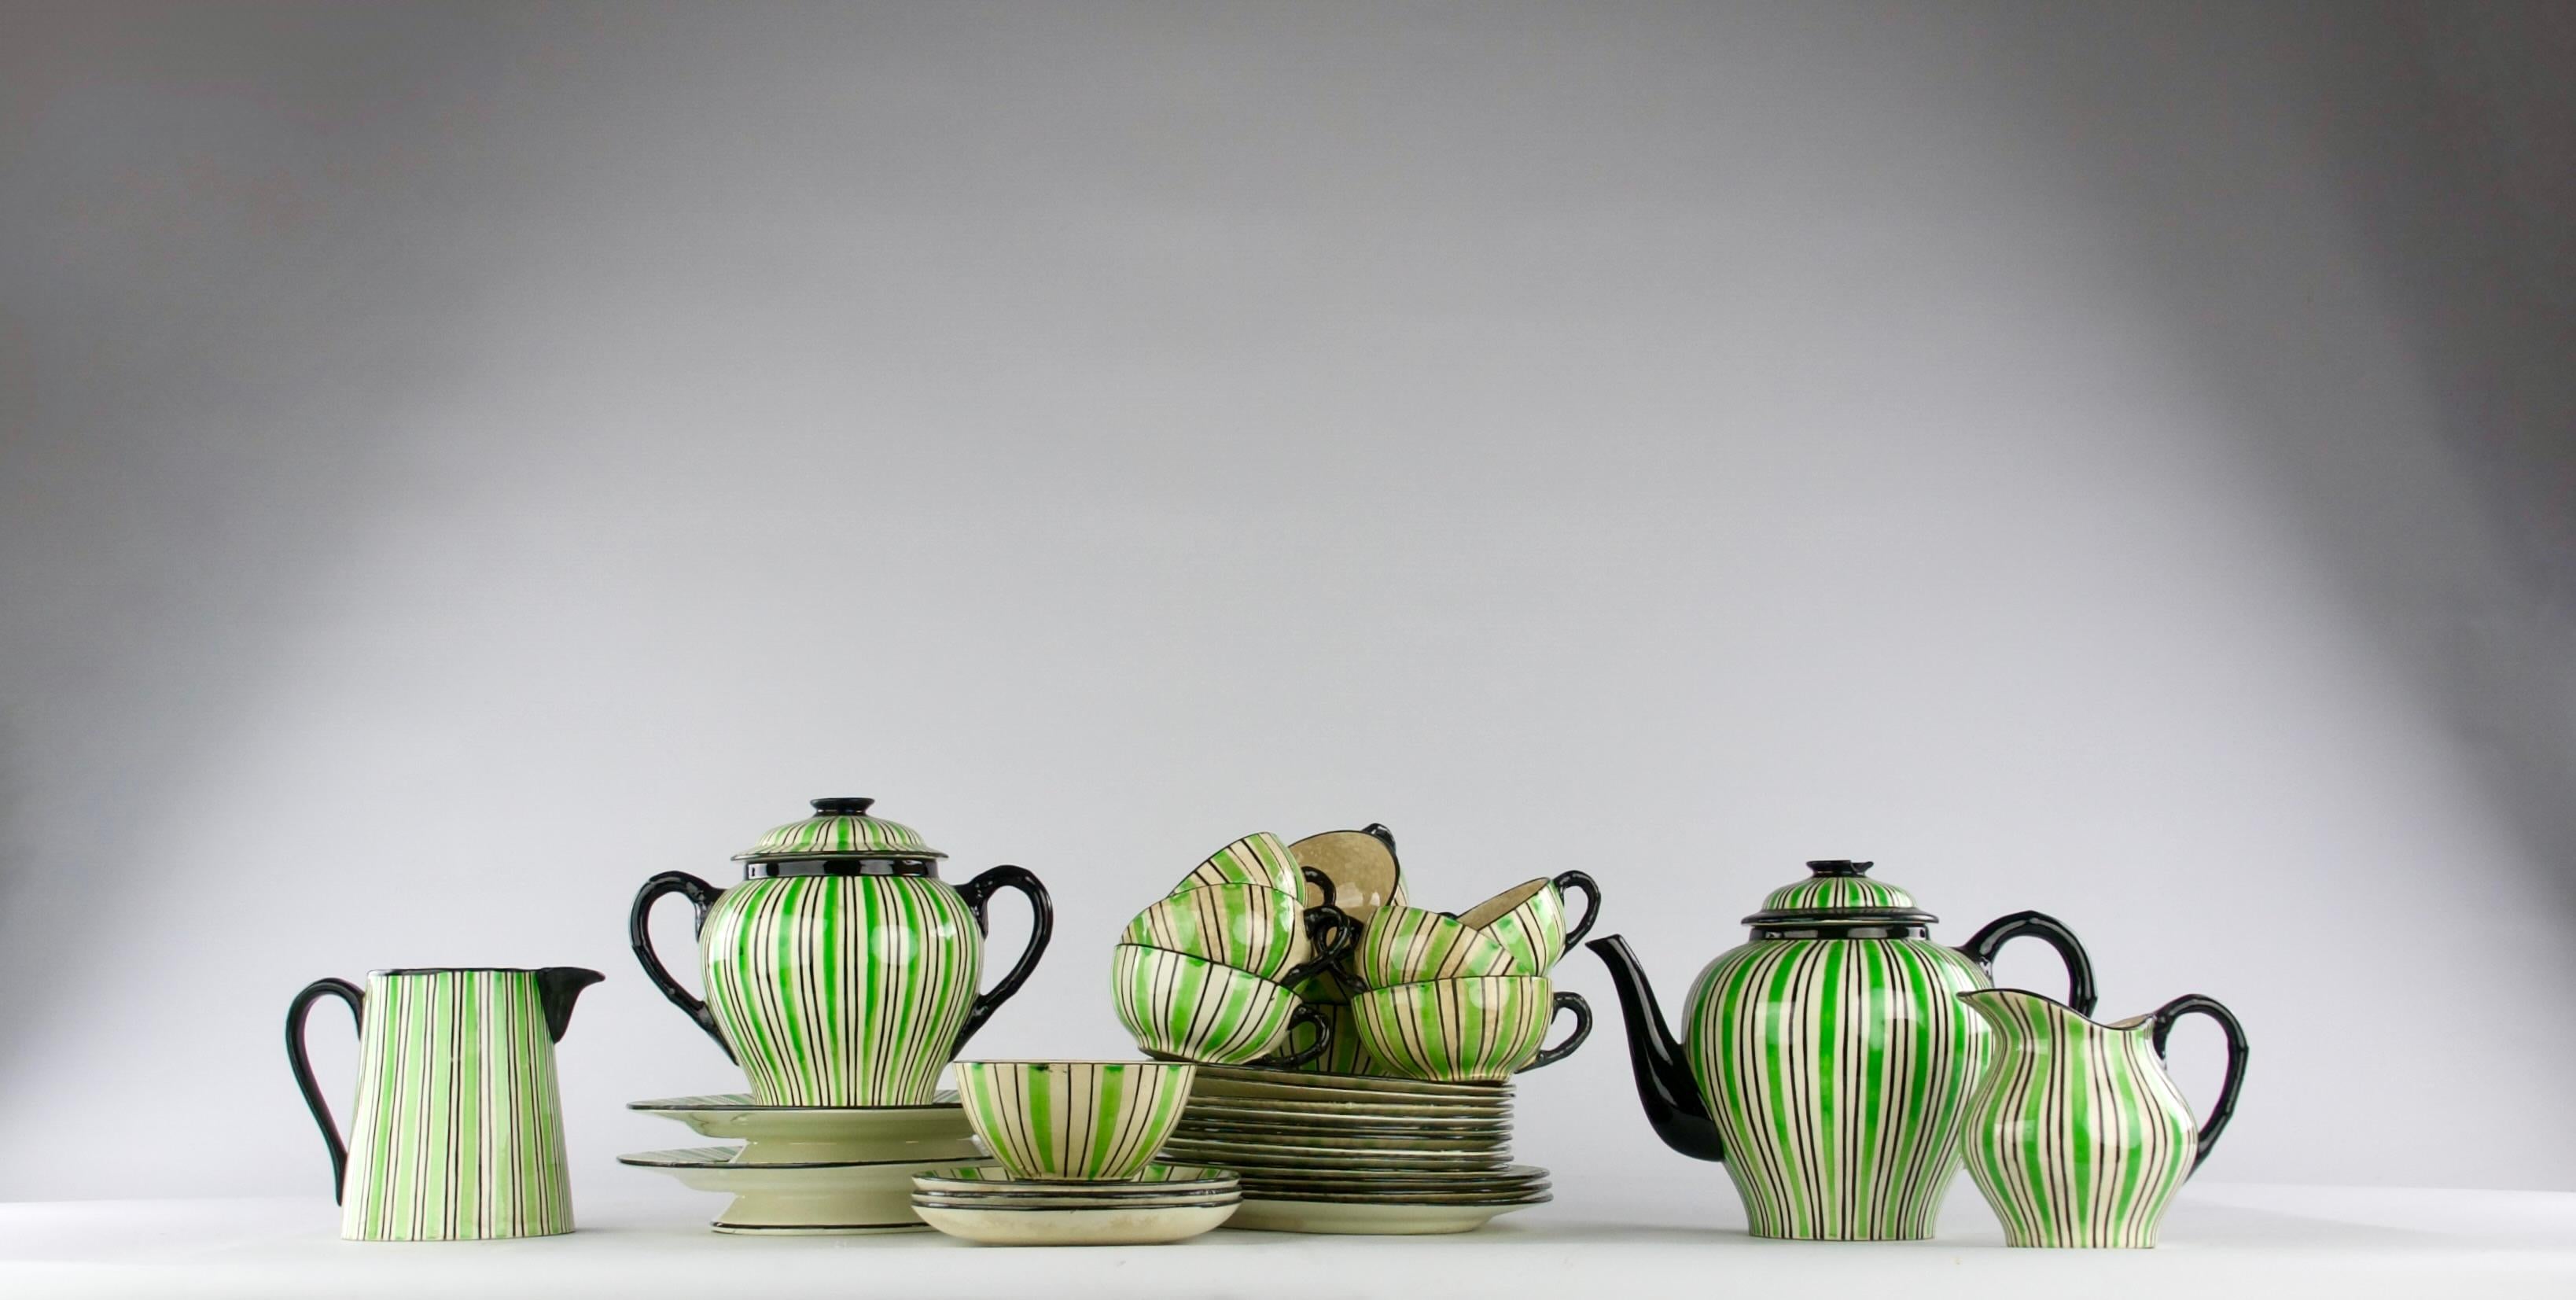 Superb and extremely rare Primavera designed striped tea and coffee service for Creil-Montereau, France 1920s/30s.

In fair condition. One chip on lid of teapot and very slight grenures on spout. Foot of bowl glued back. Staining/signs of use. Apart